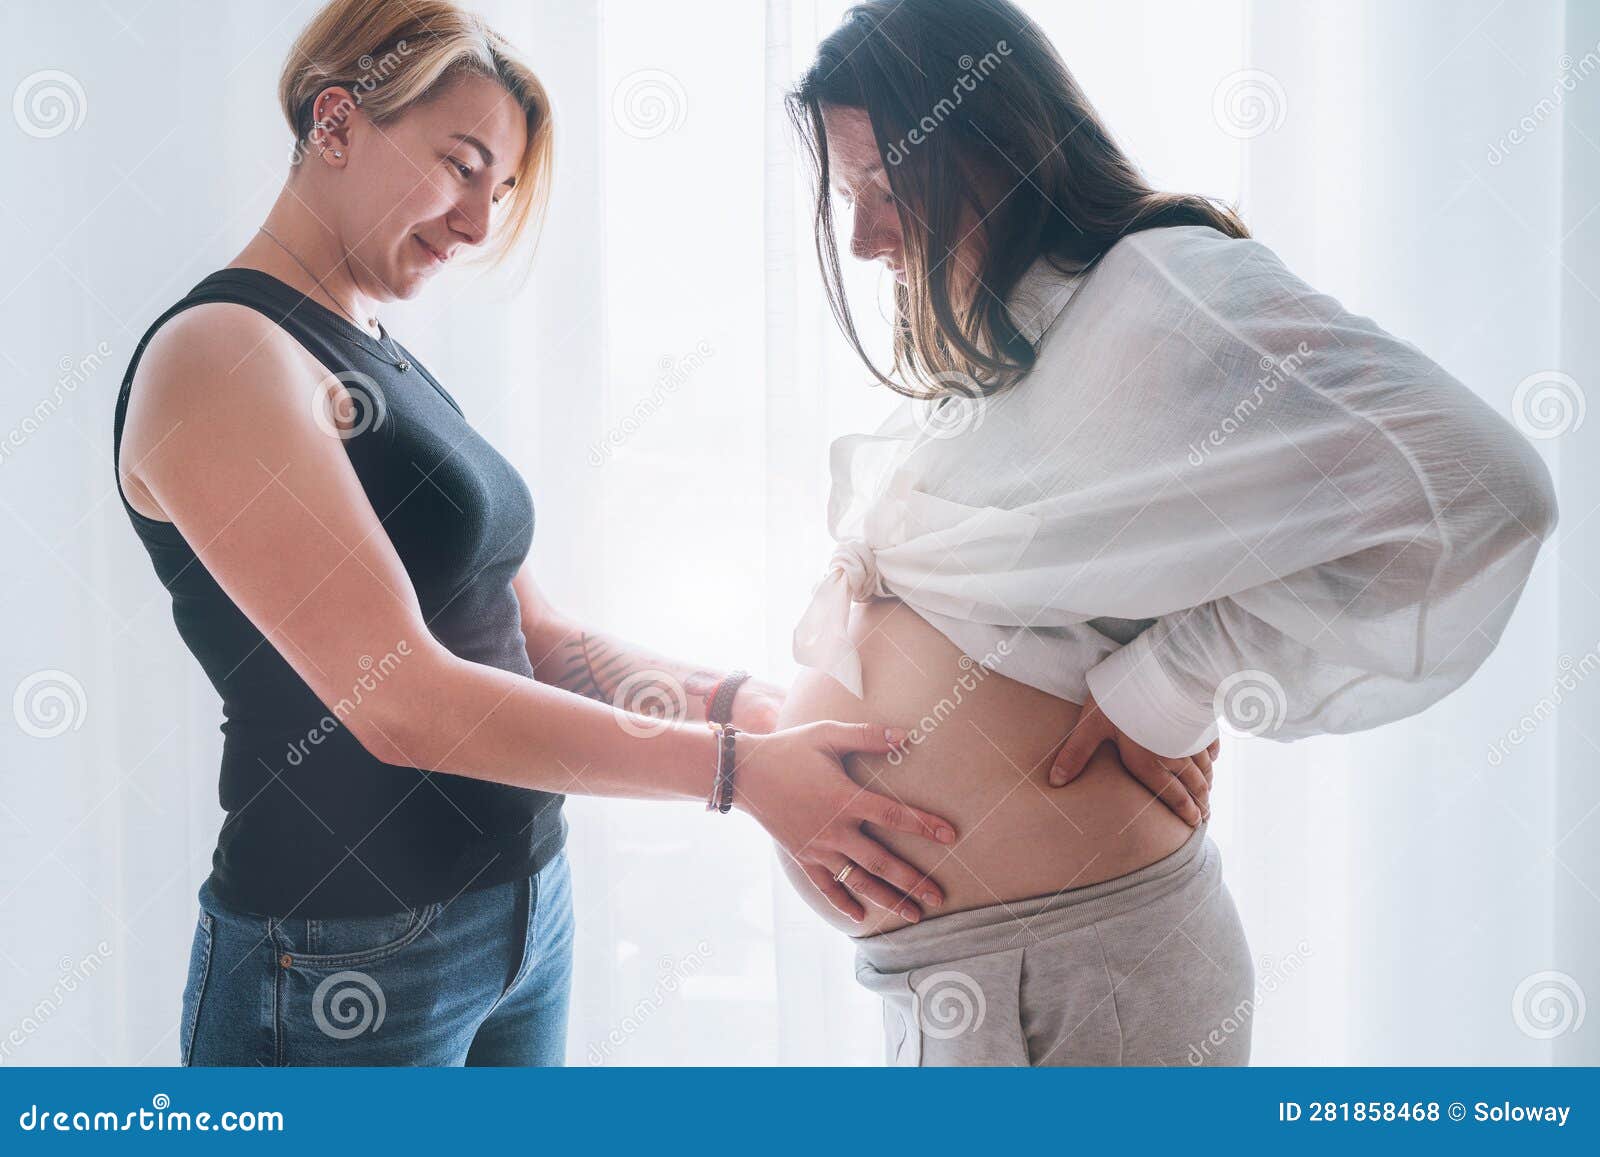 Young Woman Tender Touching Partner S Female Pregnant Belly